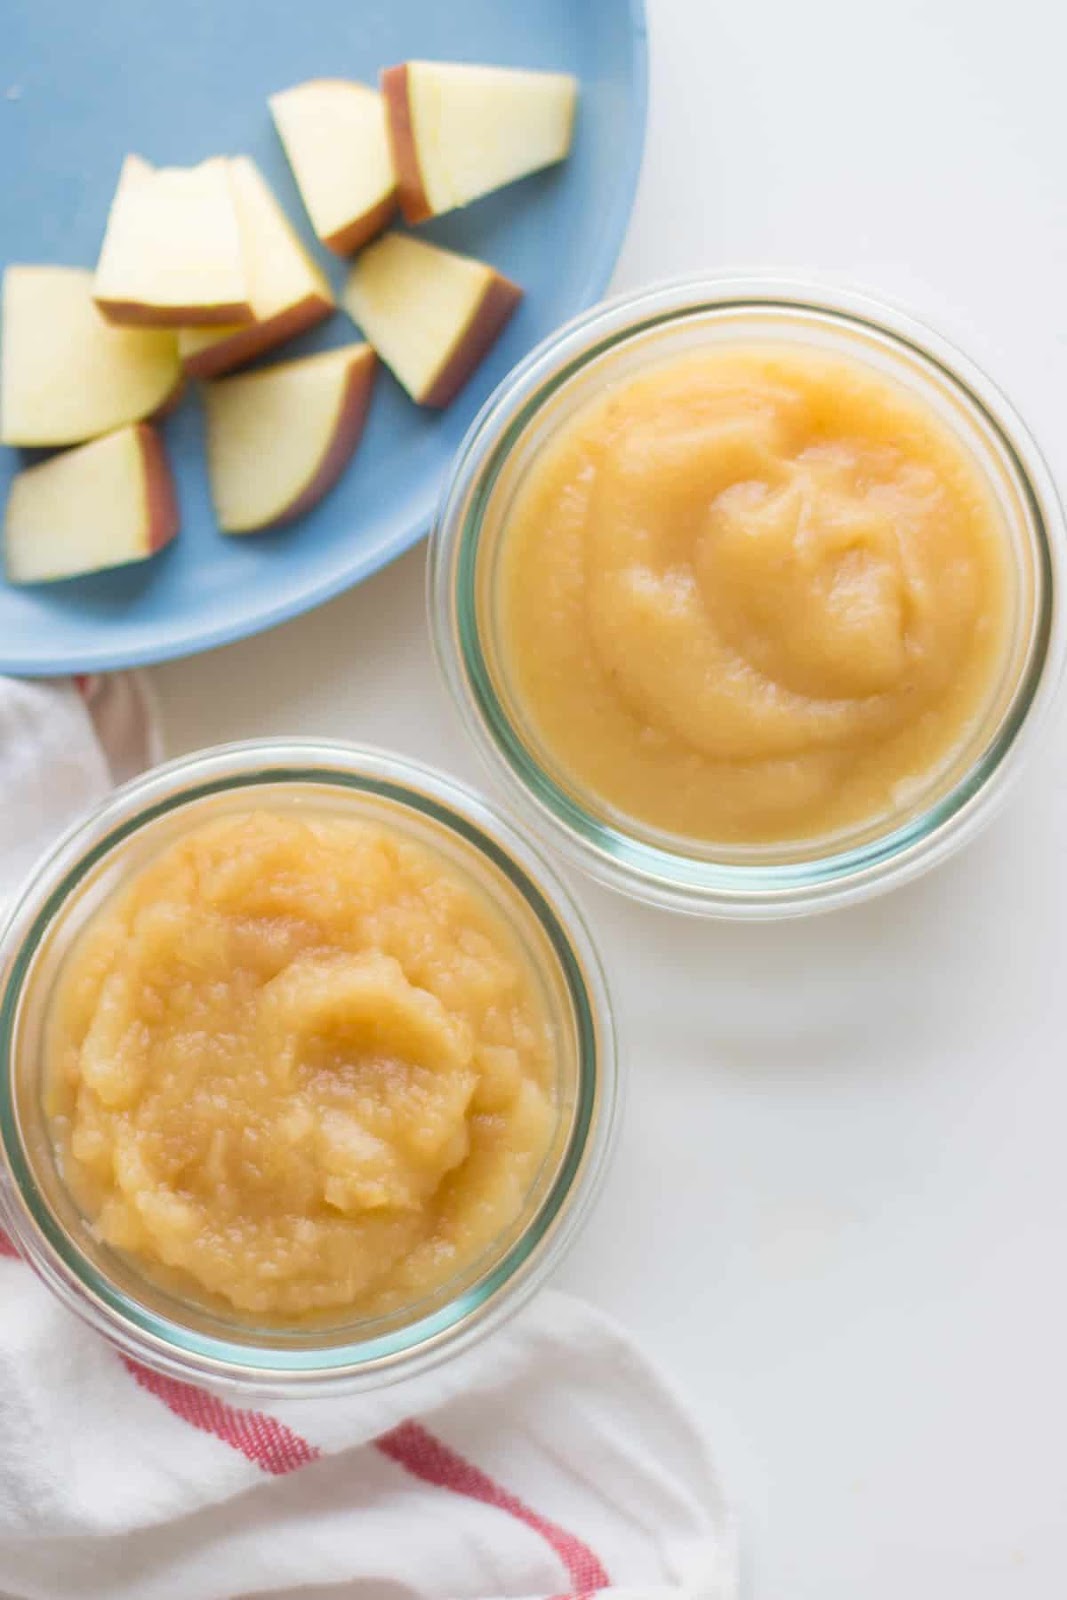 How to Make Apple Puree for Baby: Quick & Nutritious Guide